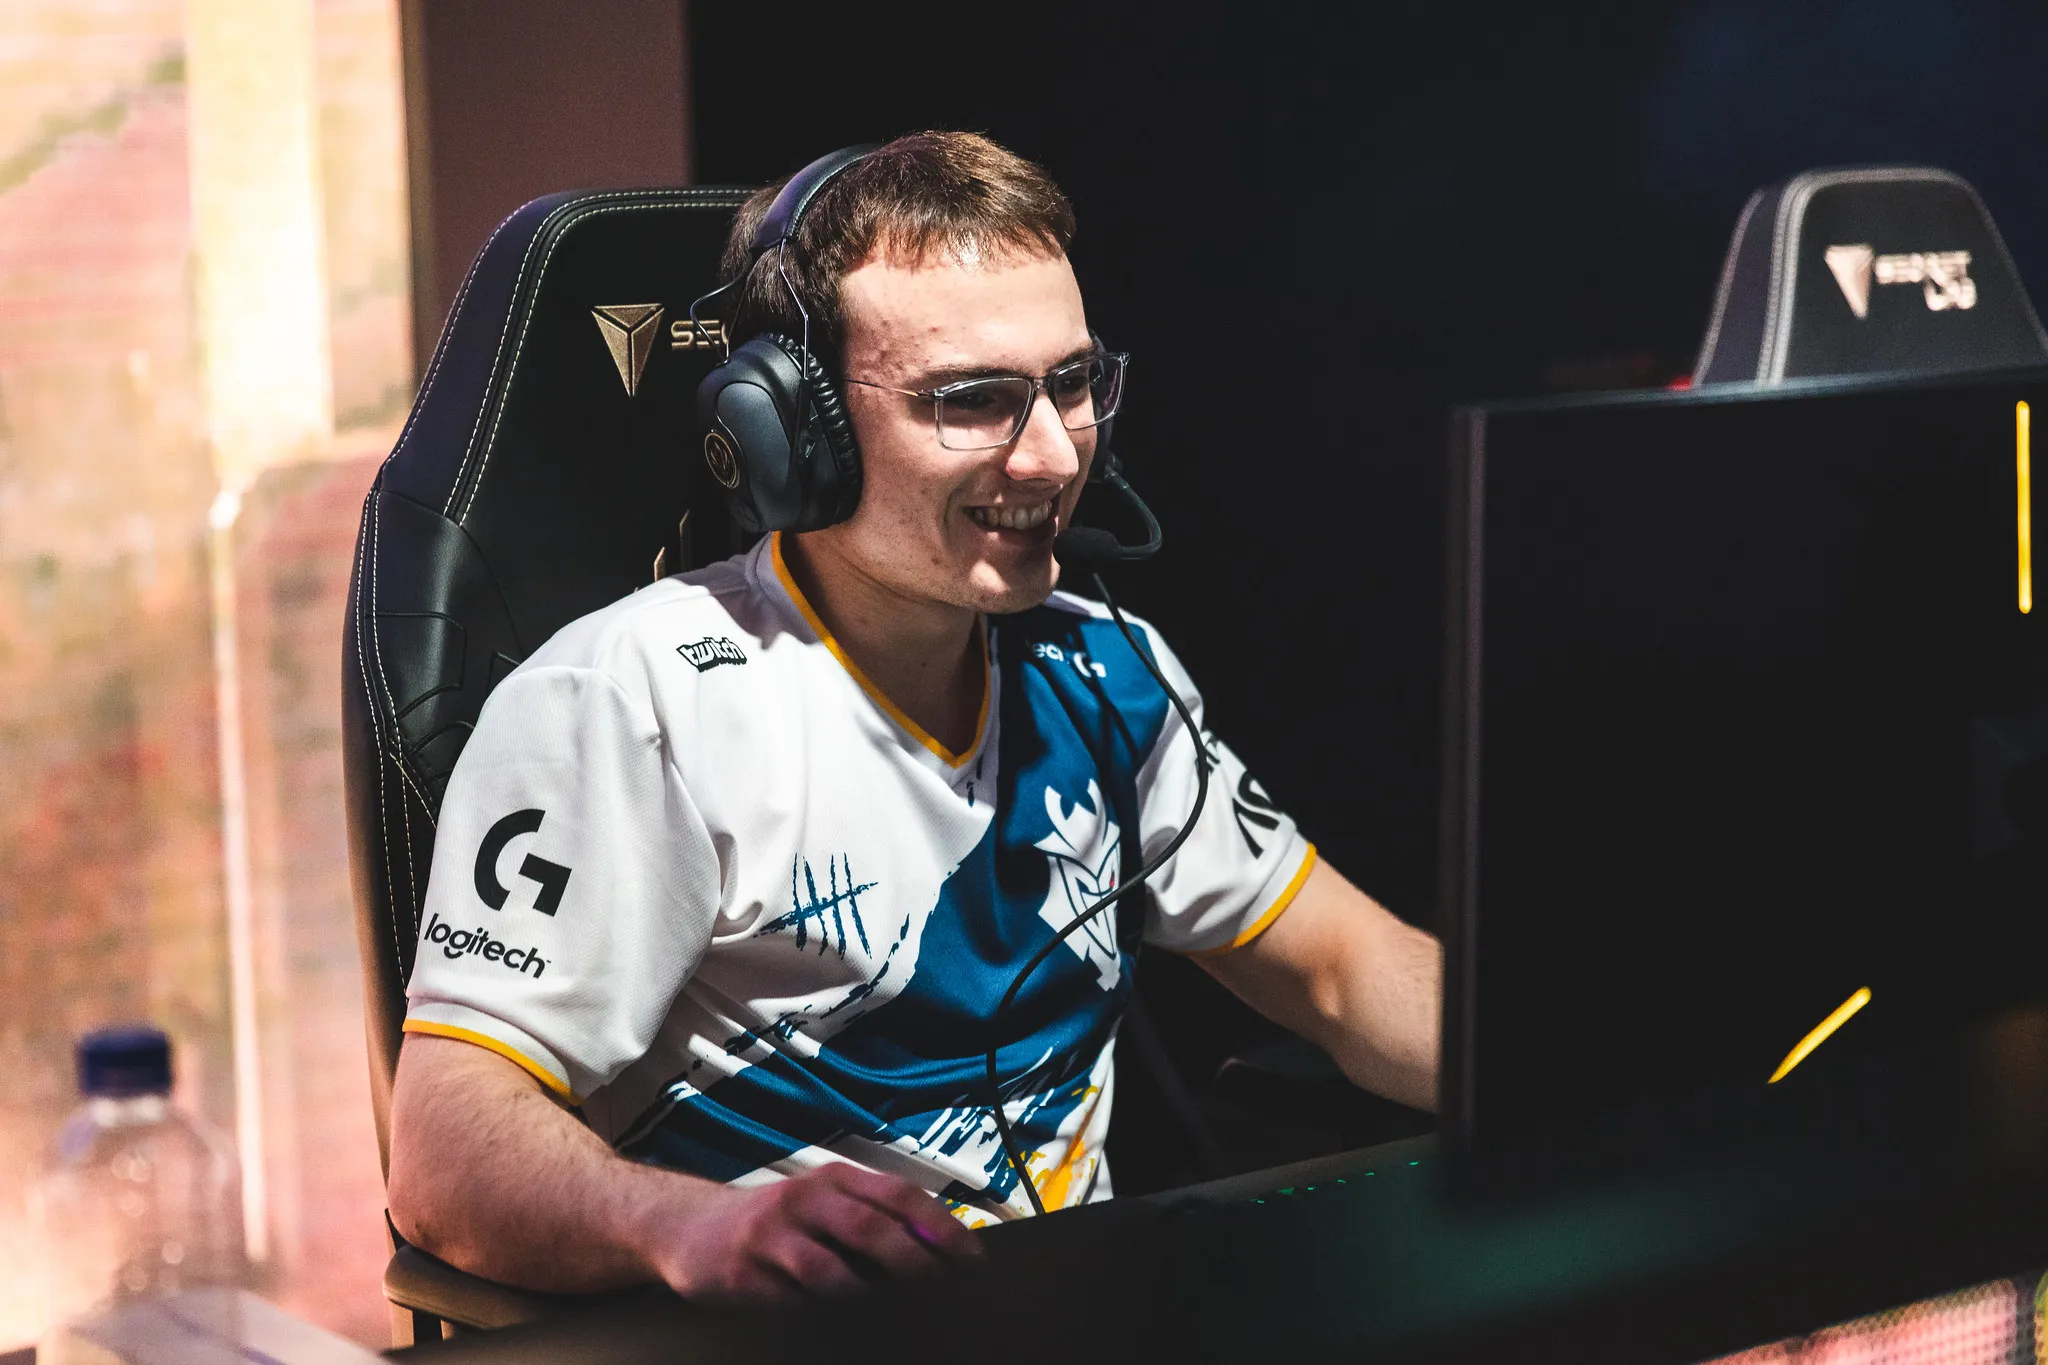 Perzk with G2 Esports at MSI 2019